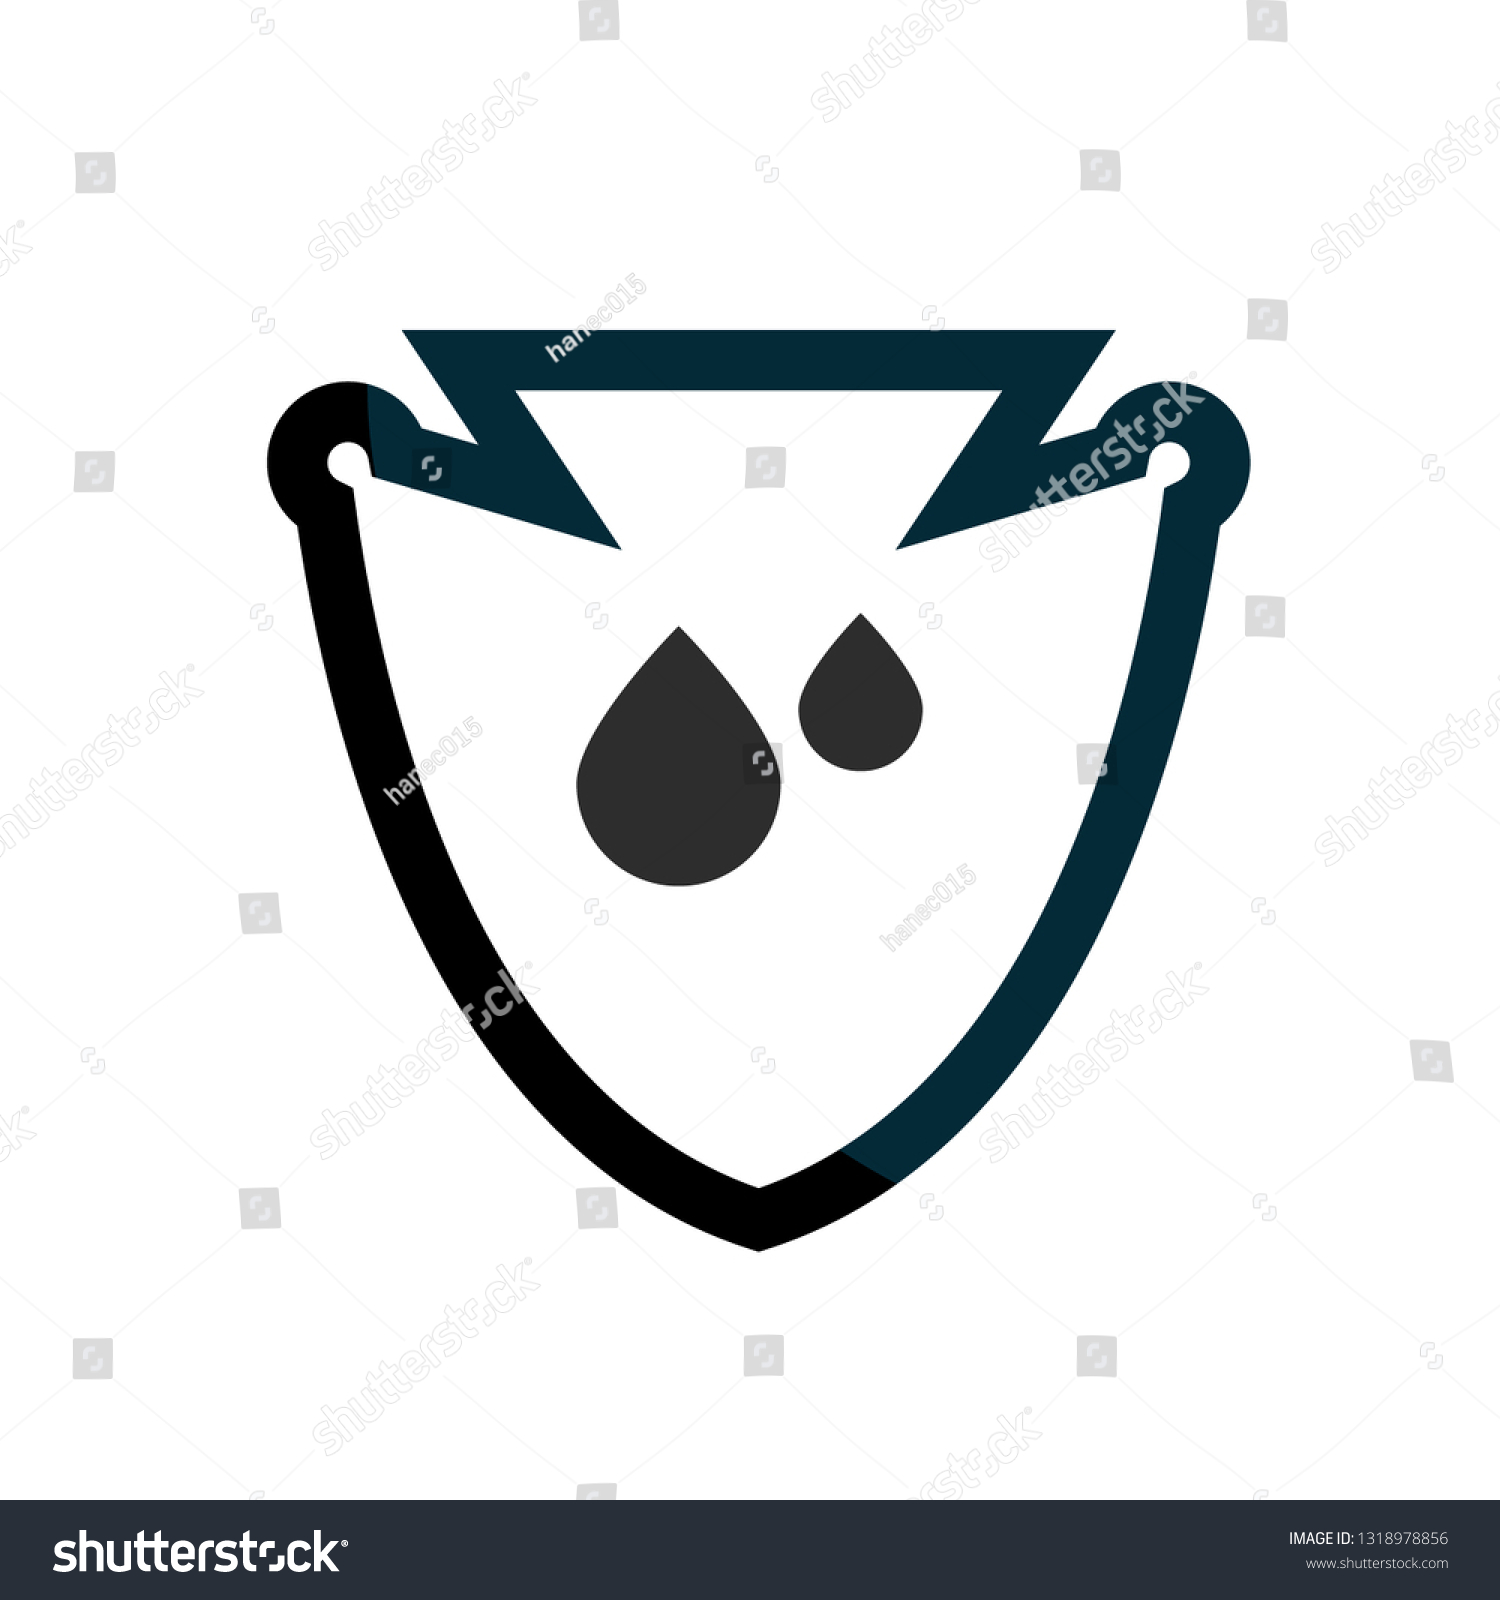 waterproof vector icon.drop and coat of arms symbol. Can be used as icon for security, protected graphic object. transparent object #1318978856